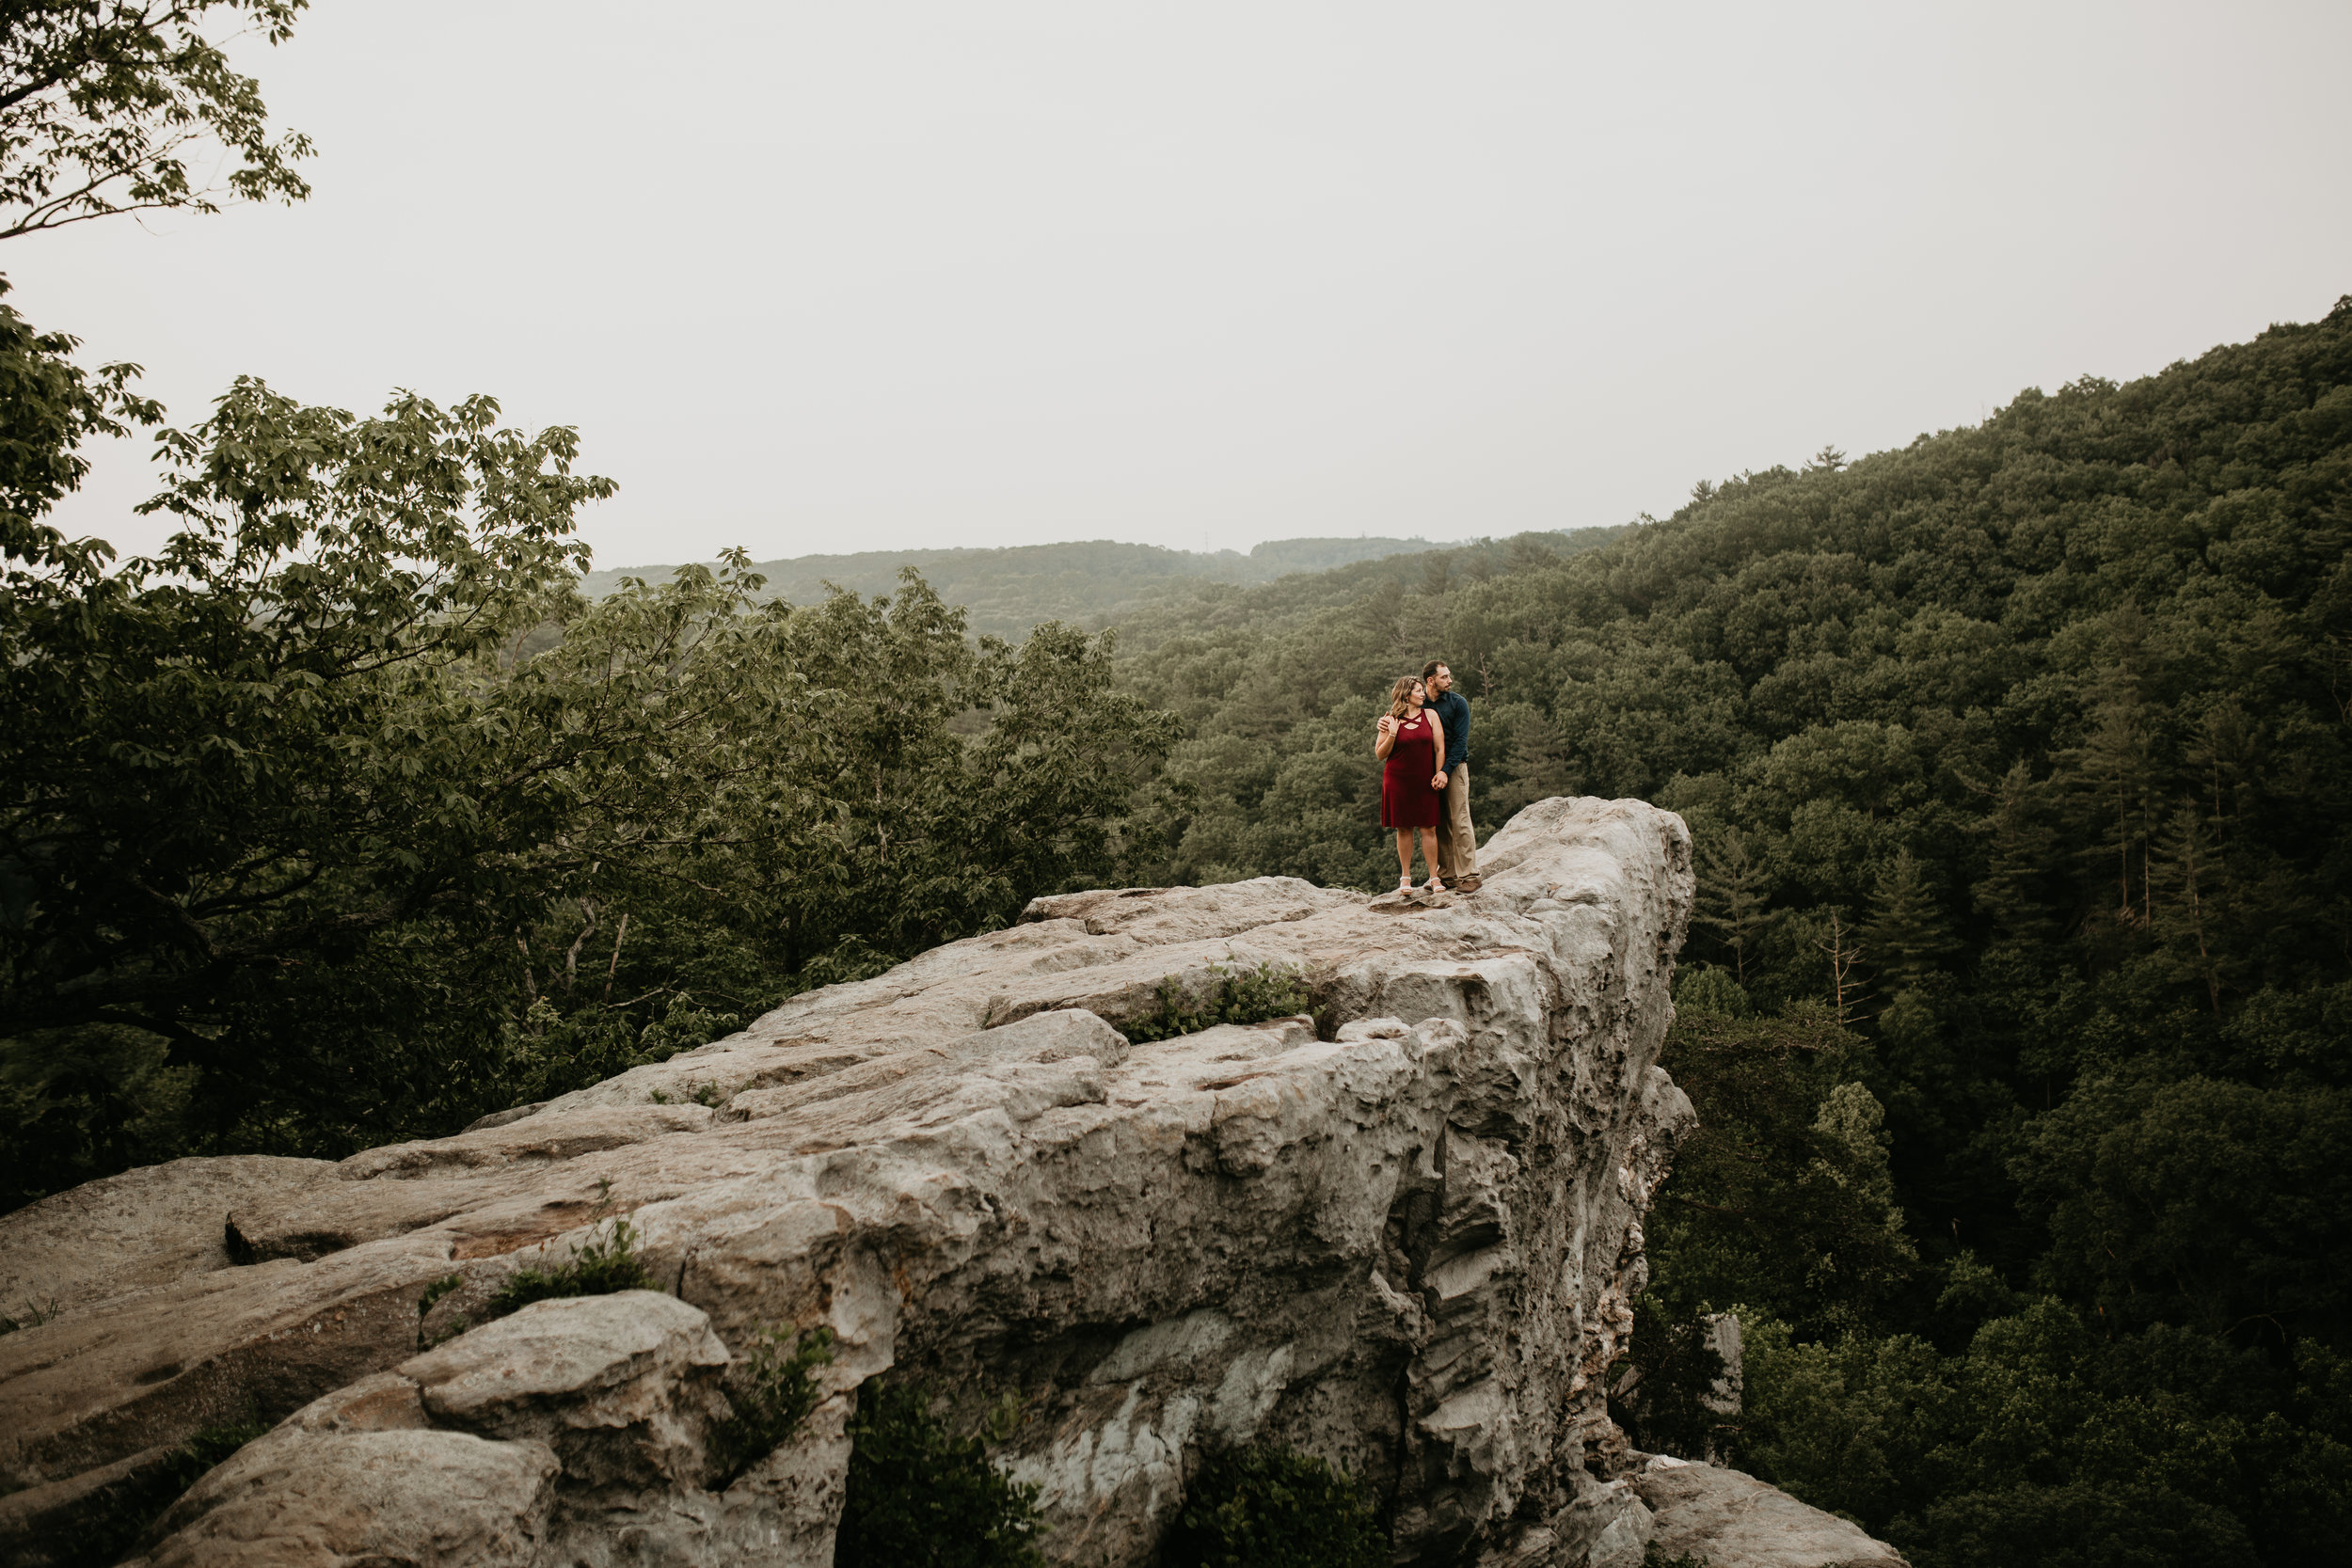 Nicole-Daacke-Photography-rock-state-park-overlook-king-queen-seat-maryland-hiking-adventure-engagement-session-photos-portraits-summer-bel-air-dog-engagement-session-24.jpg